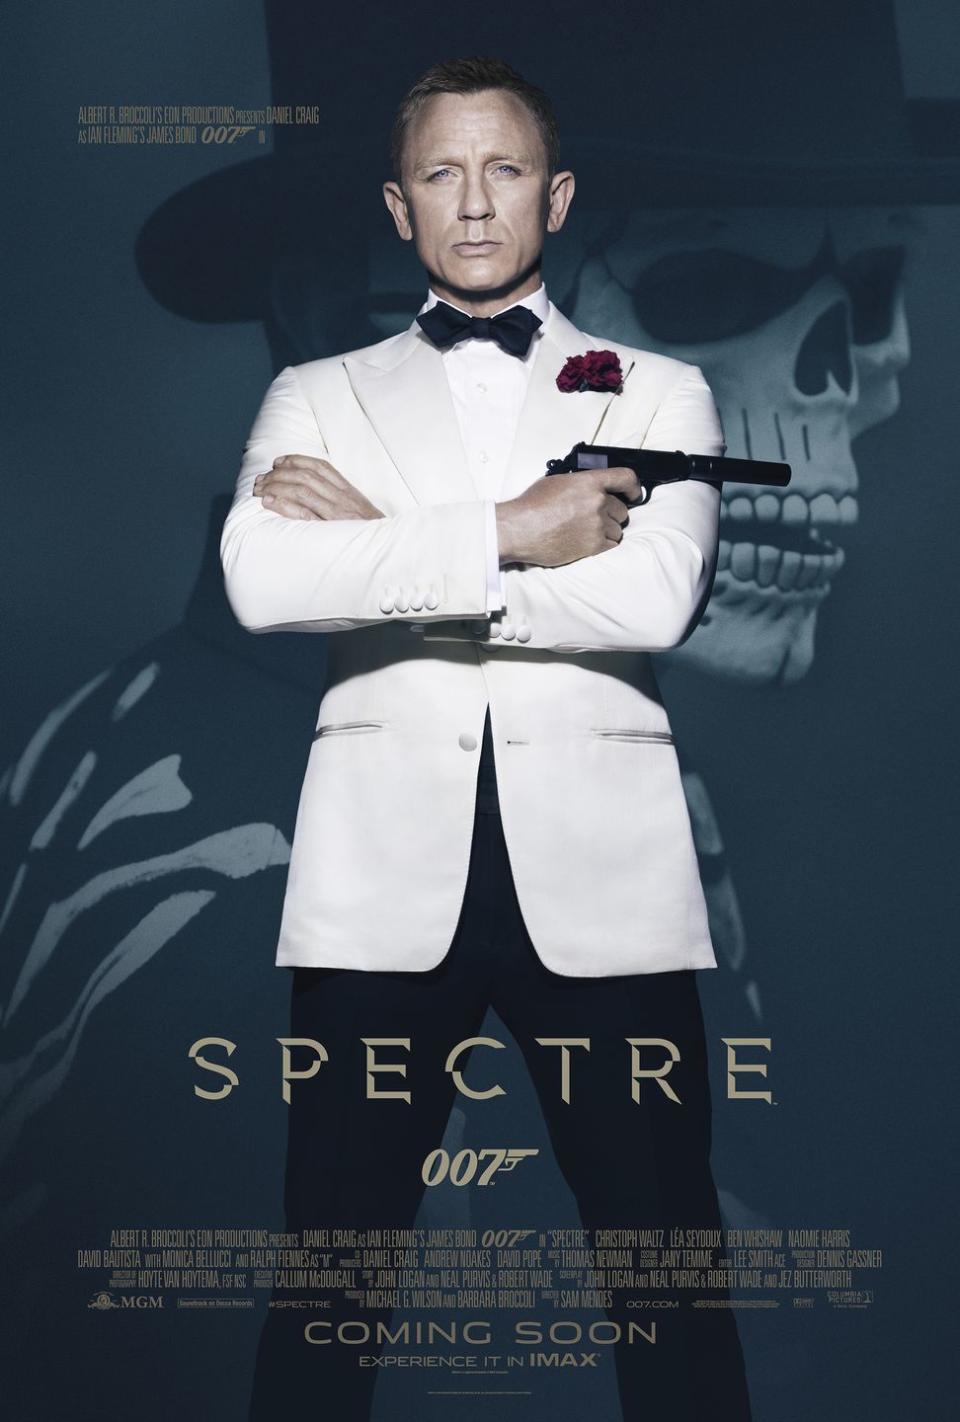 <p>The plot picks up where <em>Skyfall </em>ends, and Bond investigates the titular terrorist organization, Spectre. Christopher Waltz plays the villain, Ernst Stavro Blofeld.Of note: <em>Spectre </em>opened with a remarkable four-minute tracking shot in Mexico City. <br></p><p><a class="link " href="https://www.amazon.com/gp/video/detail/B017HXF6Z6/ref=atv_dp_amz_c_UTPsmN_1_3?tag=syn-yahoo-20&ascsubtag=%5Bartid%7C10067.g.41465876%5Bsrc%7Cyahoo-us" rel="nofollow noopener" target="_blank" data-ylk="slk:Watch on Prime">Watch on Prime</a></p>